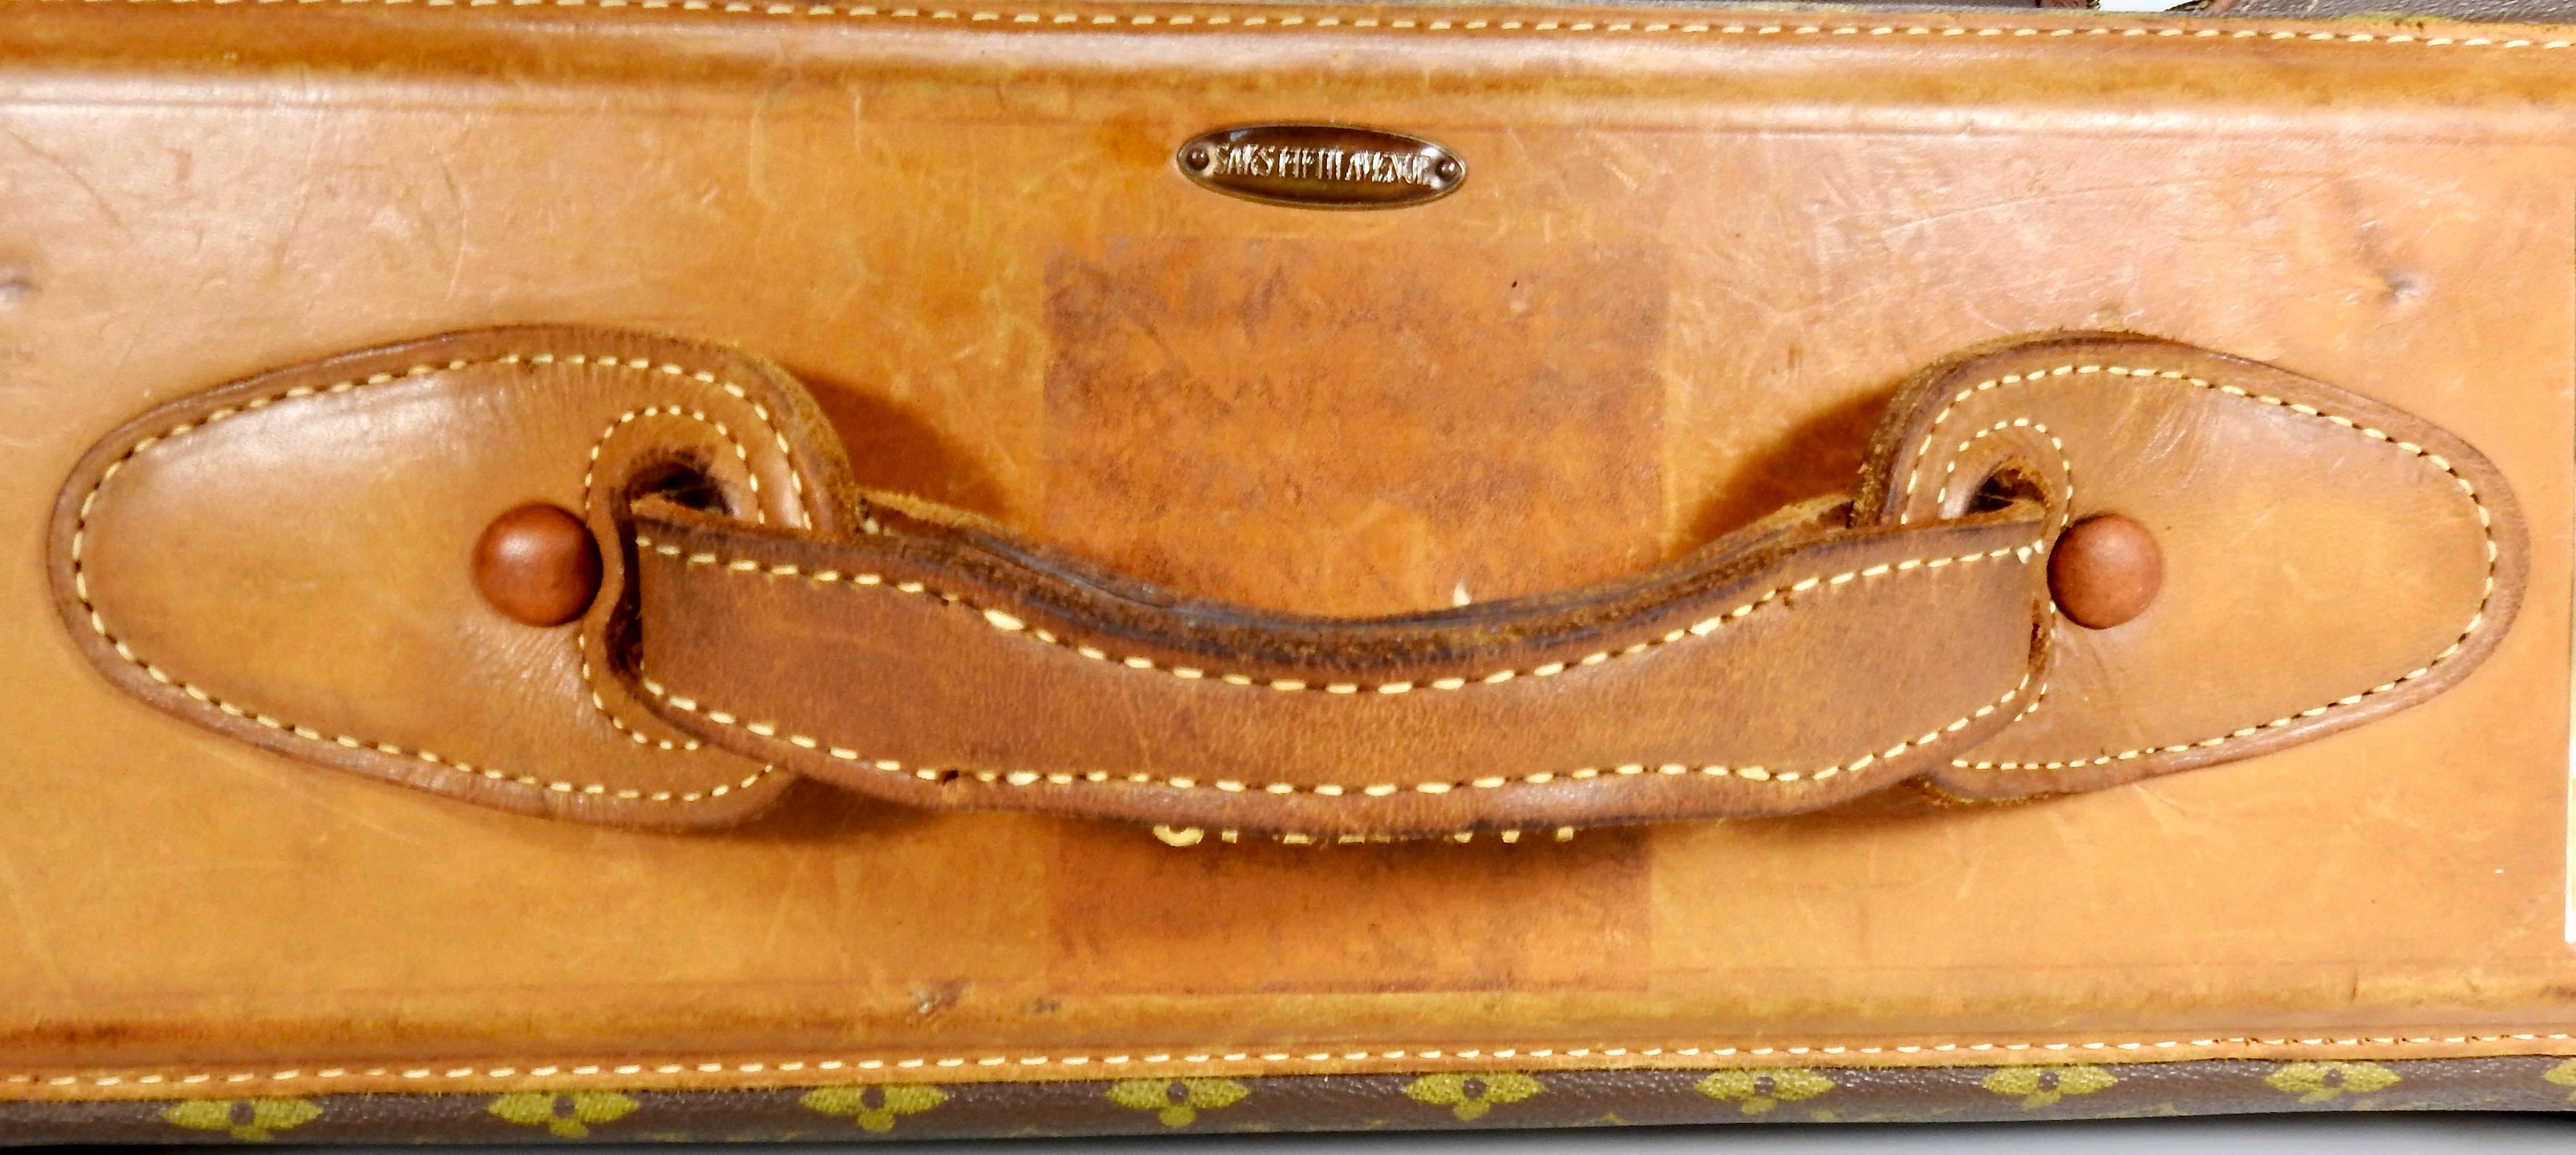 Louis Vuitton Soft Case Overnight Luggage Vintage In Fair Condition For Sale In Cookeville, TN